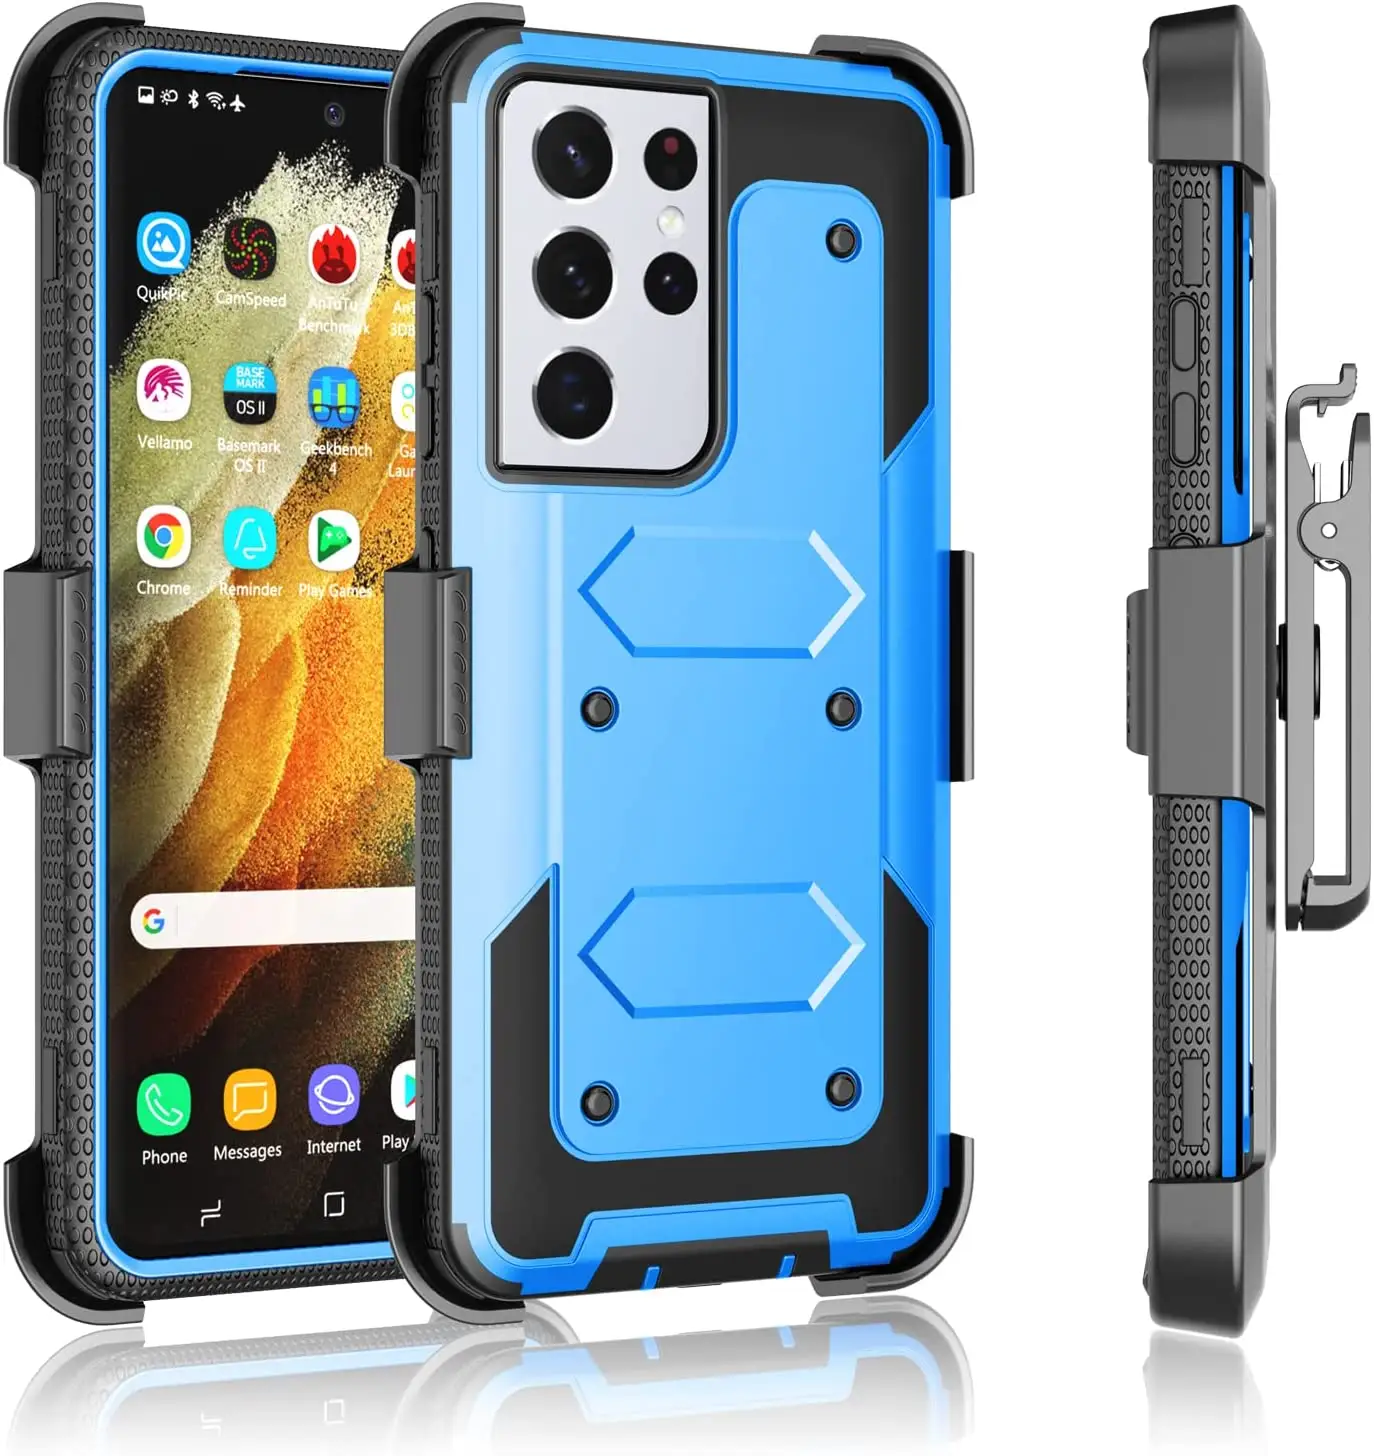 cell phone case shockproof armorbox protective case for Samsung Galaxy S21 Ultra mobile phone cover with holster belt clip